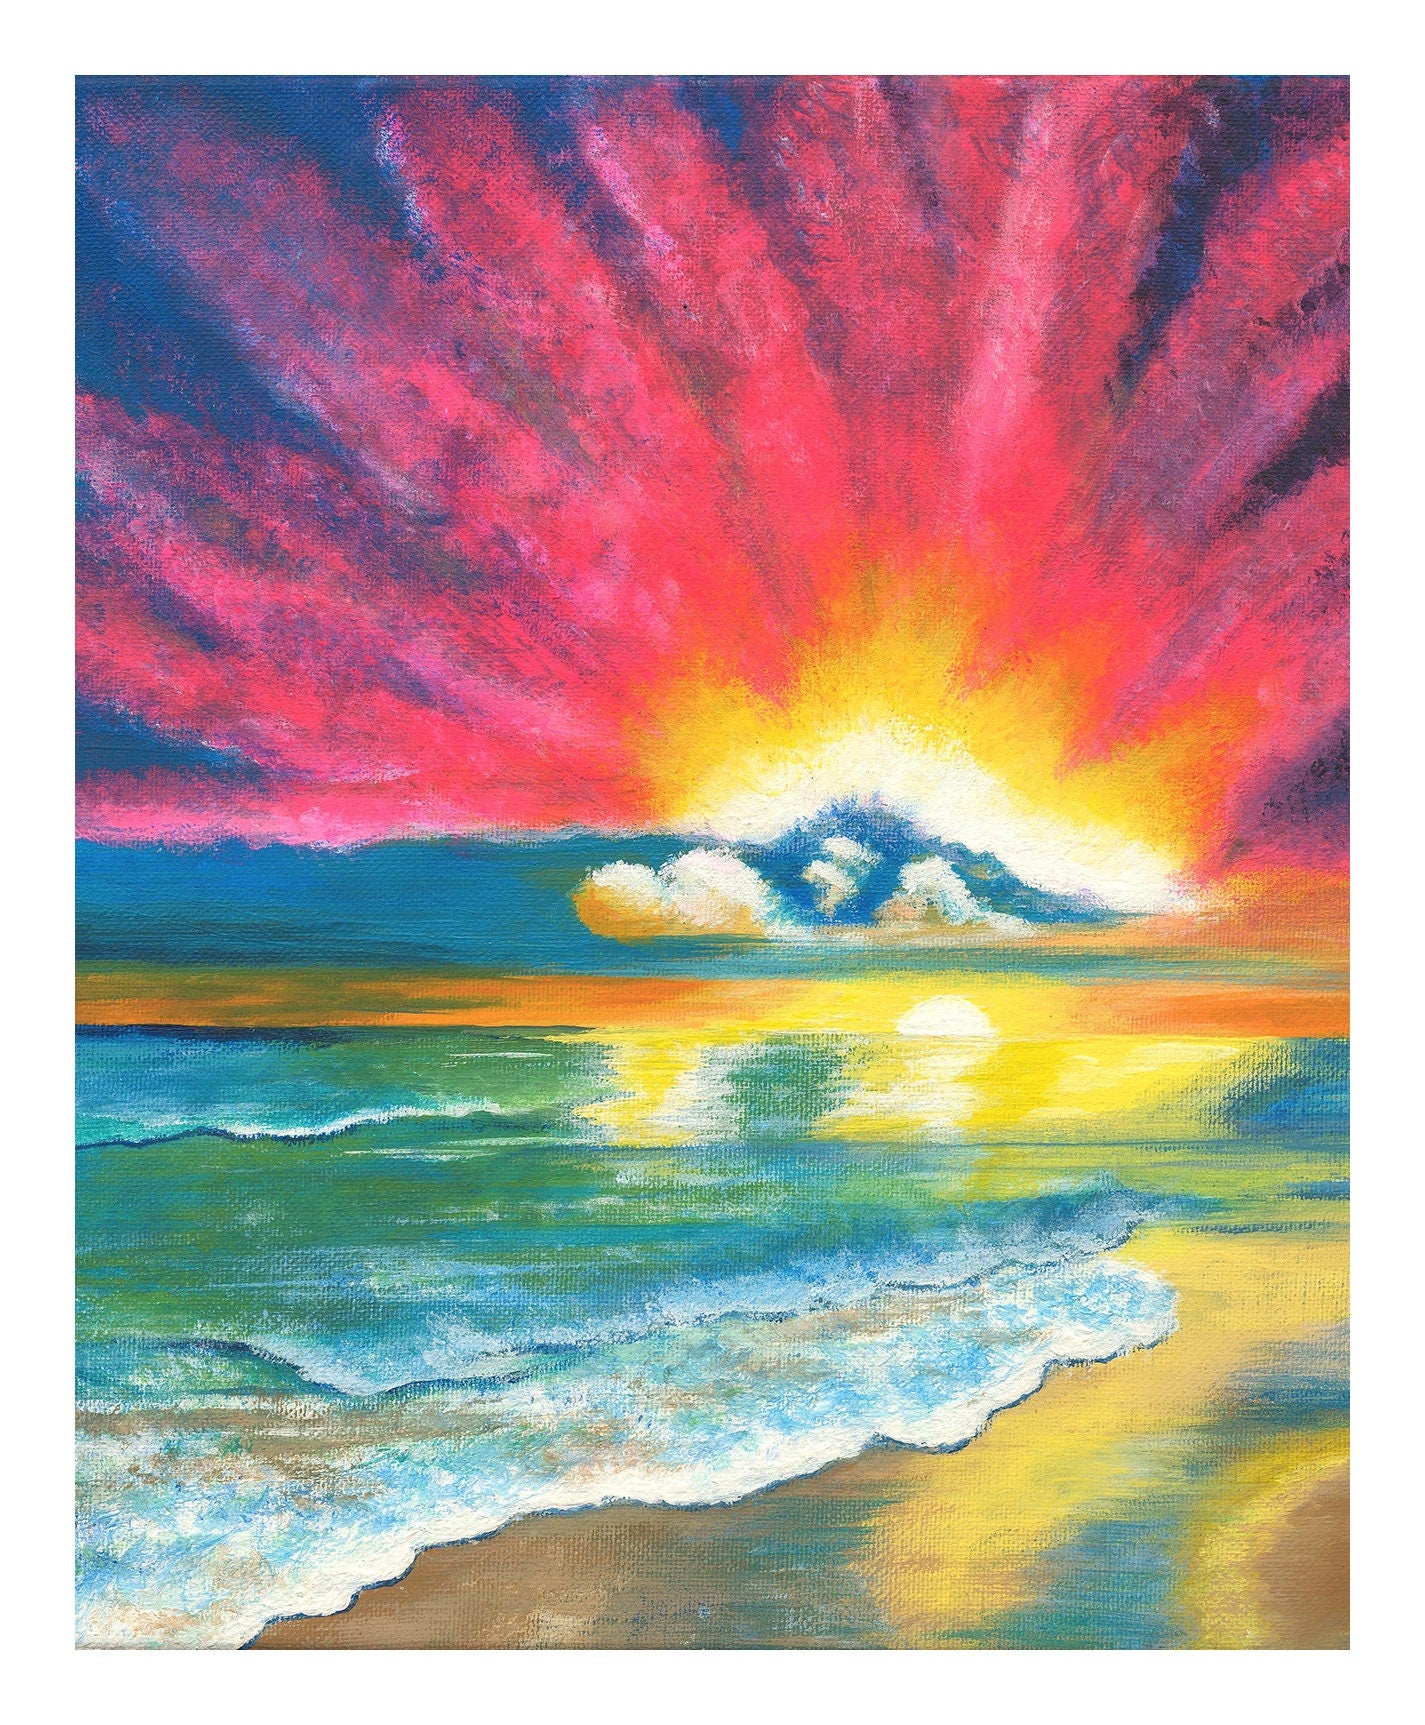 Print of Waves on Beach and Pink Cloud Sunset w/ Reflection Painting, Matted, Vibrant Colors, Beachy / Coastal / Tropical / Nautical Themed